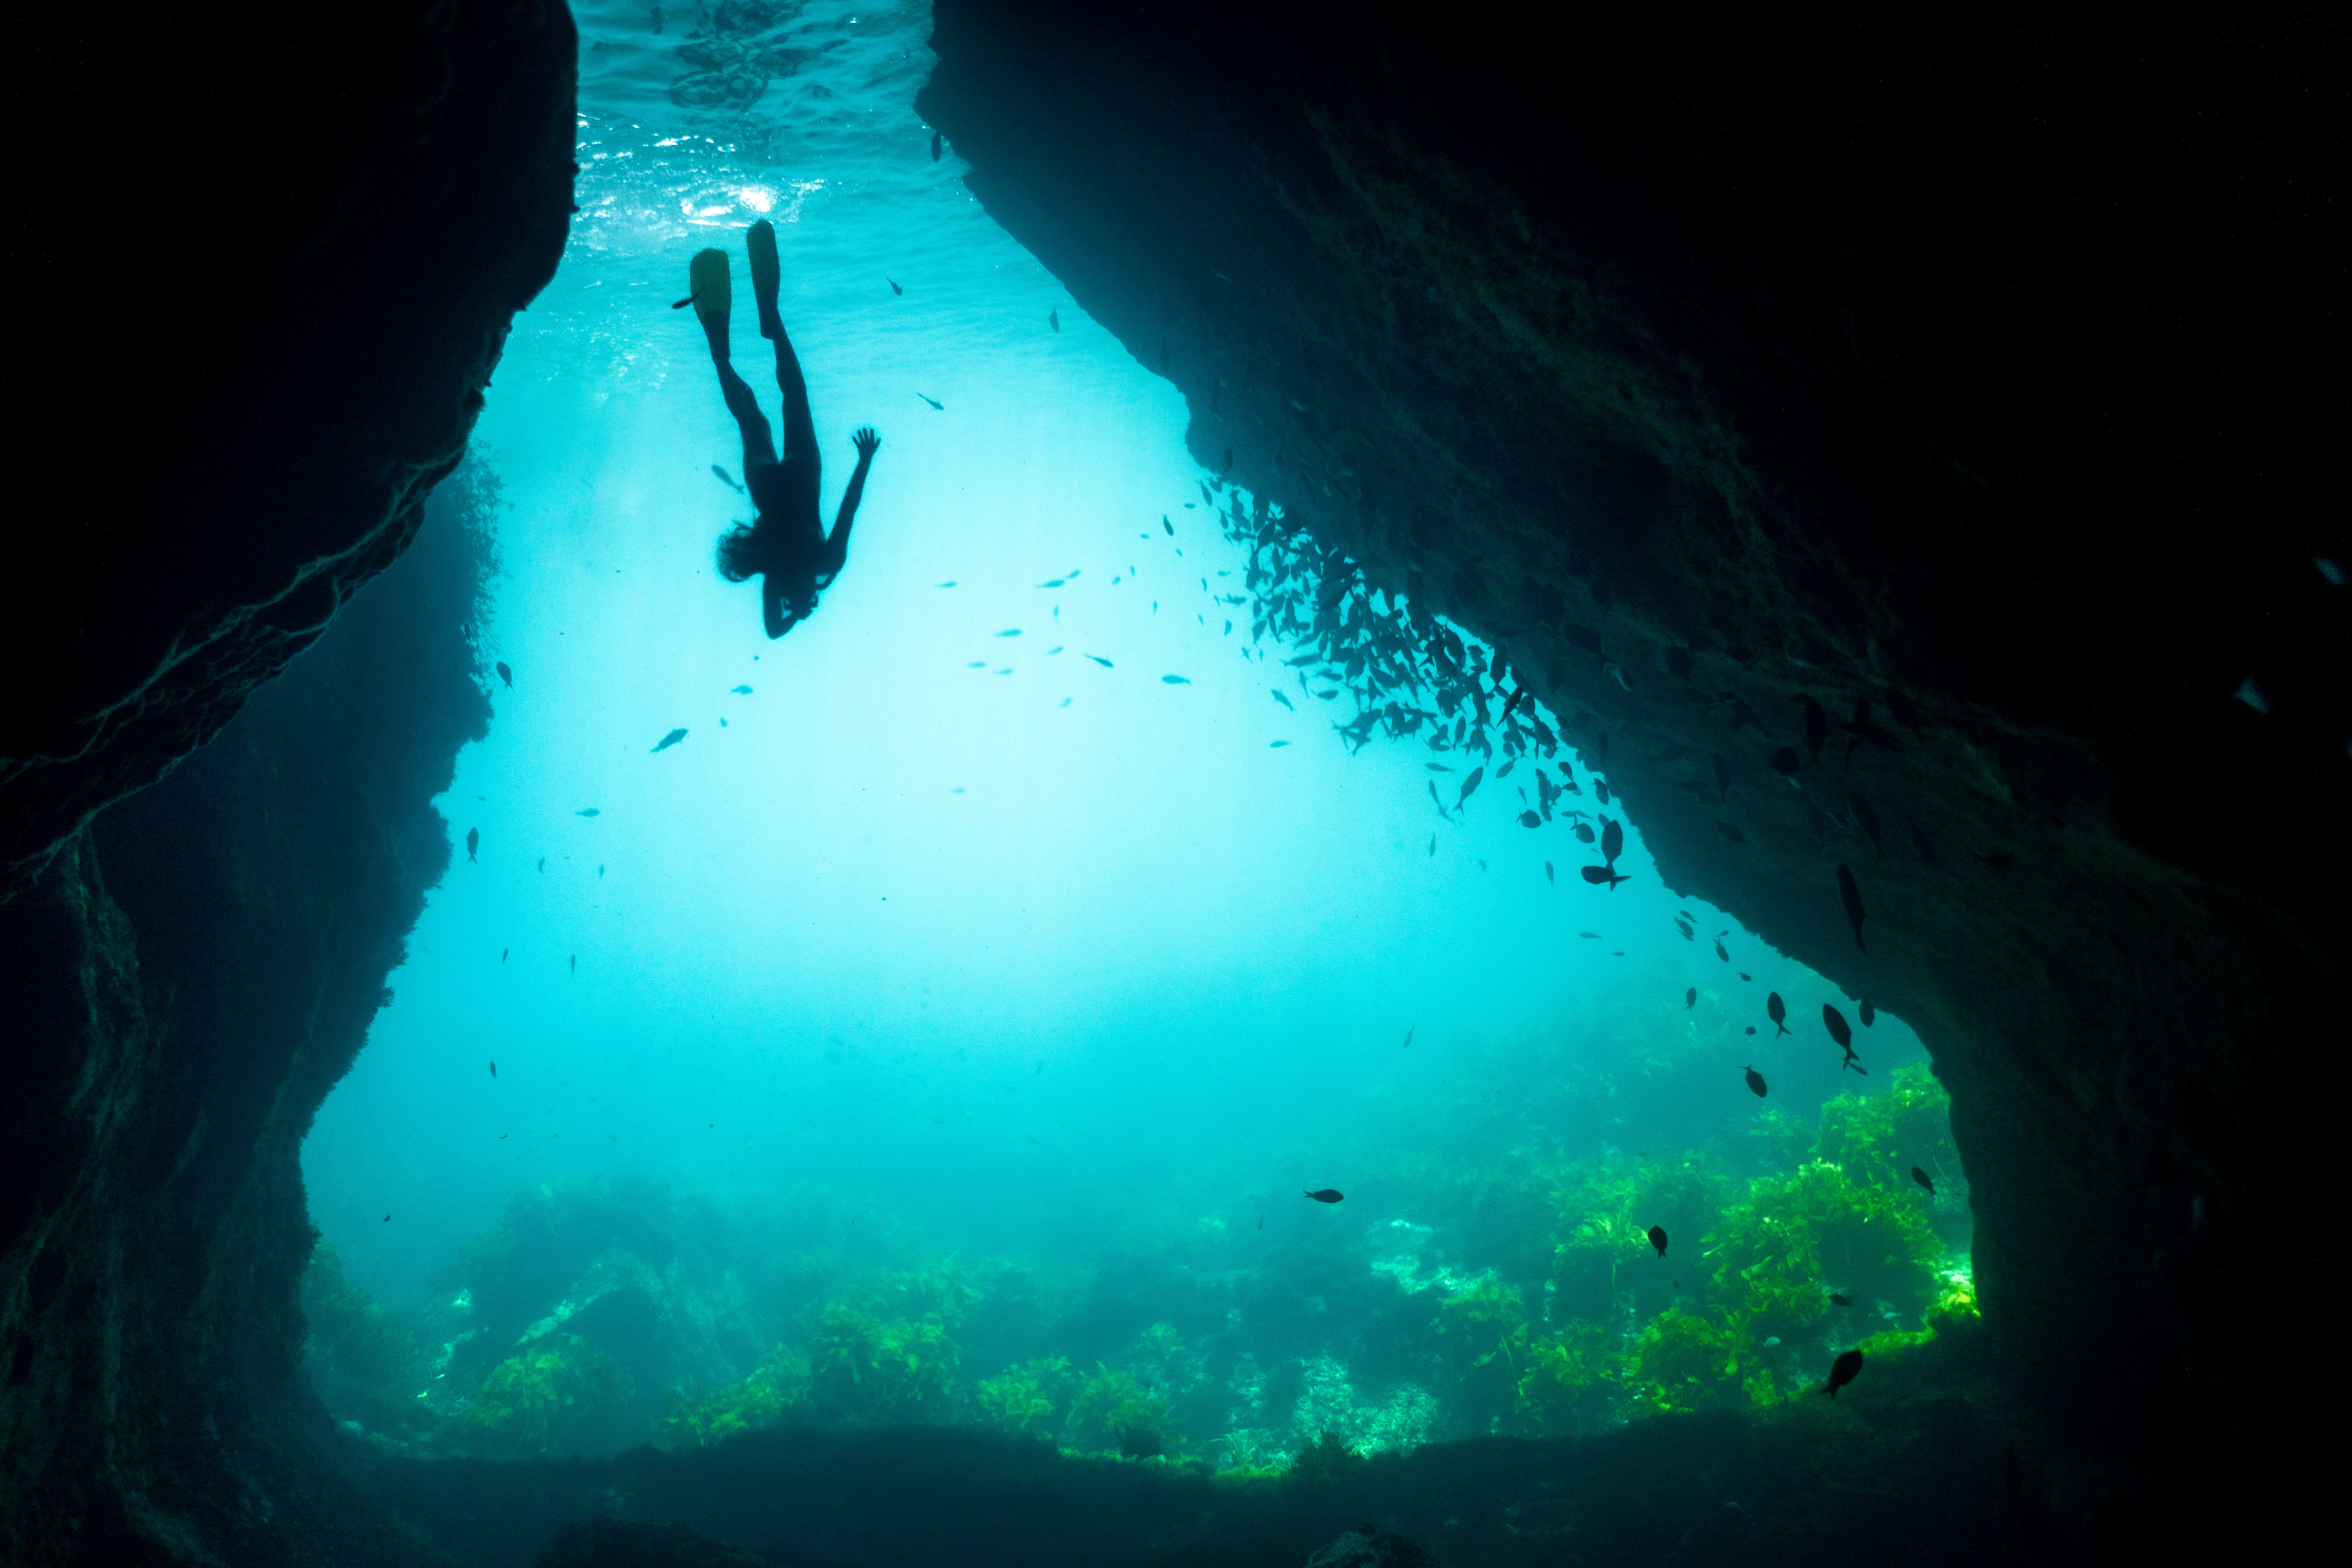 Bianca free diving to explore a hidden cave in the Poor Knights Marine Reserve - an underwater adventure